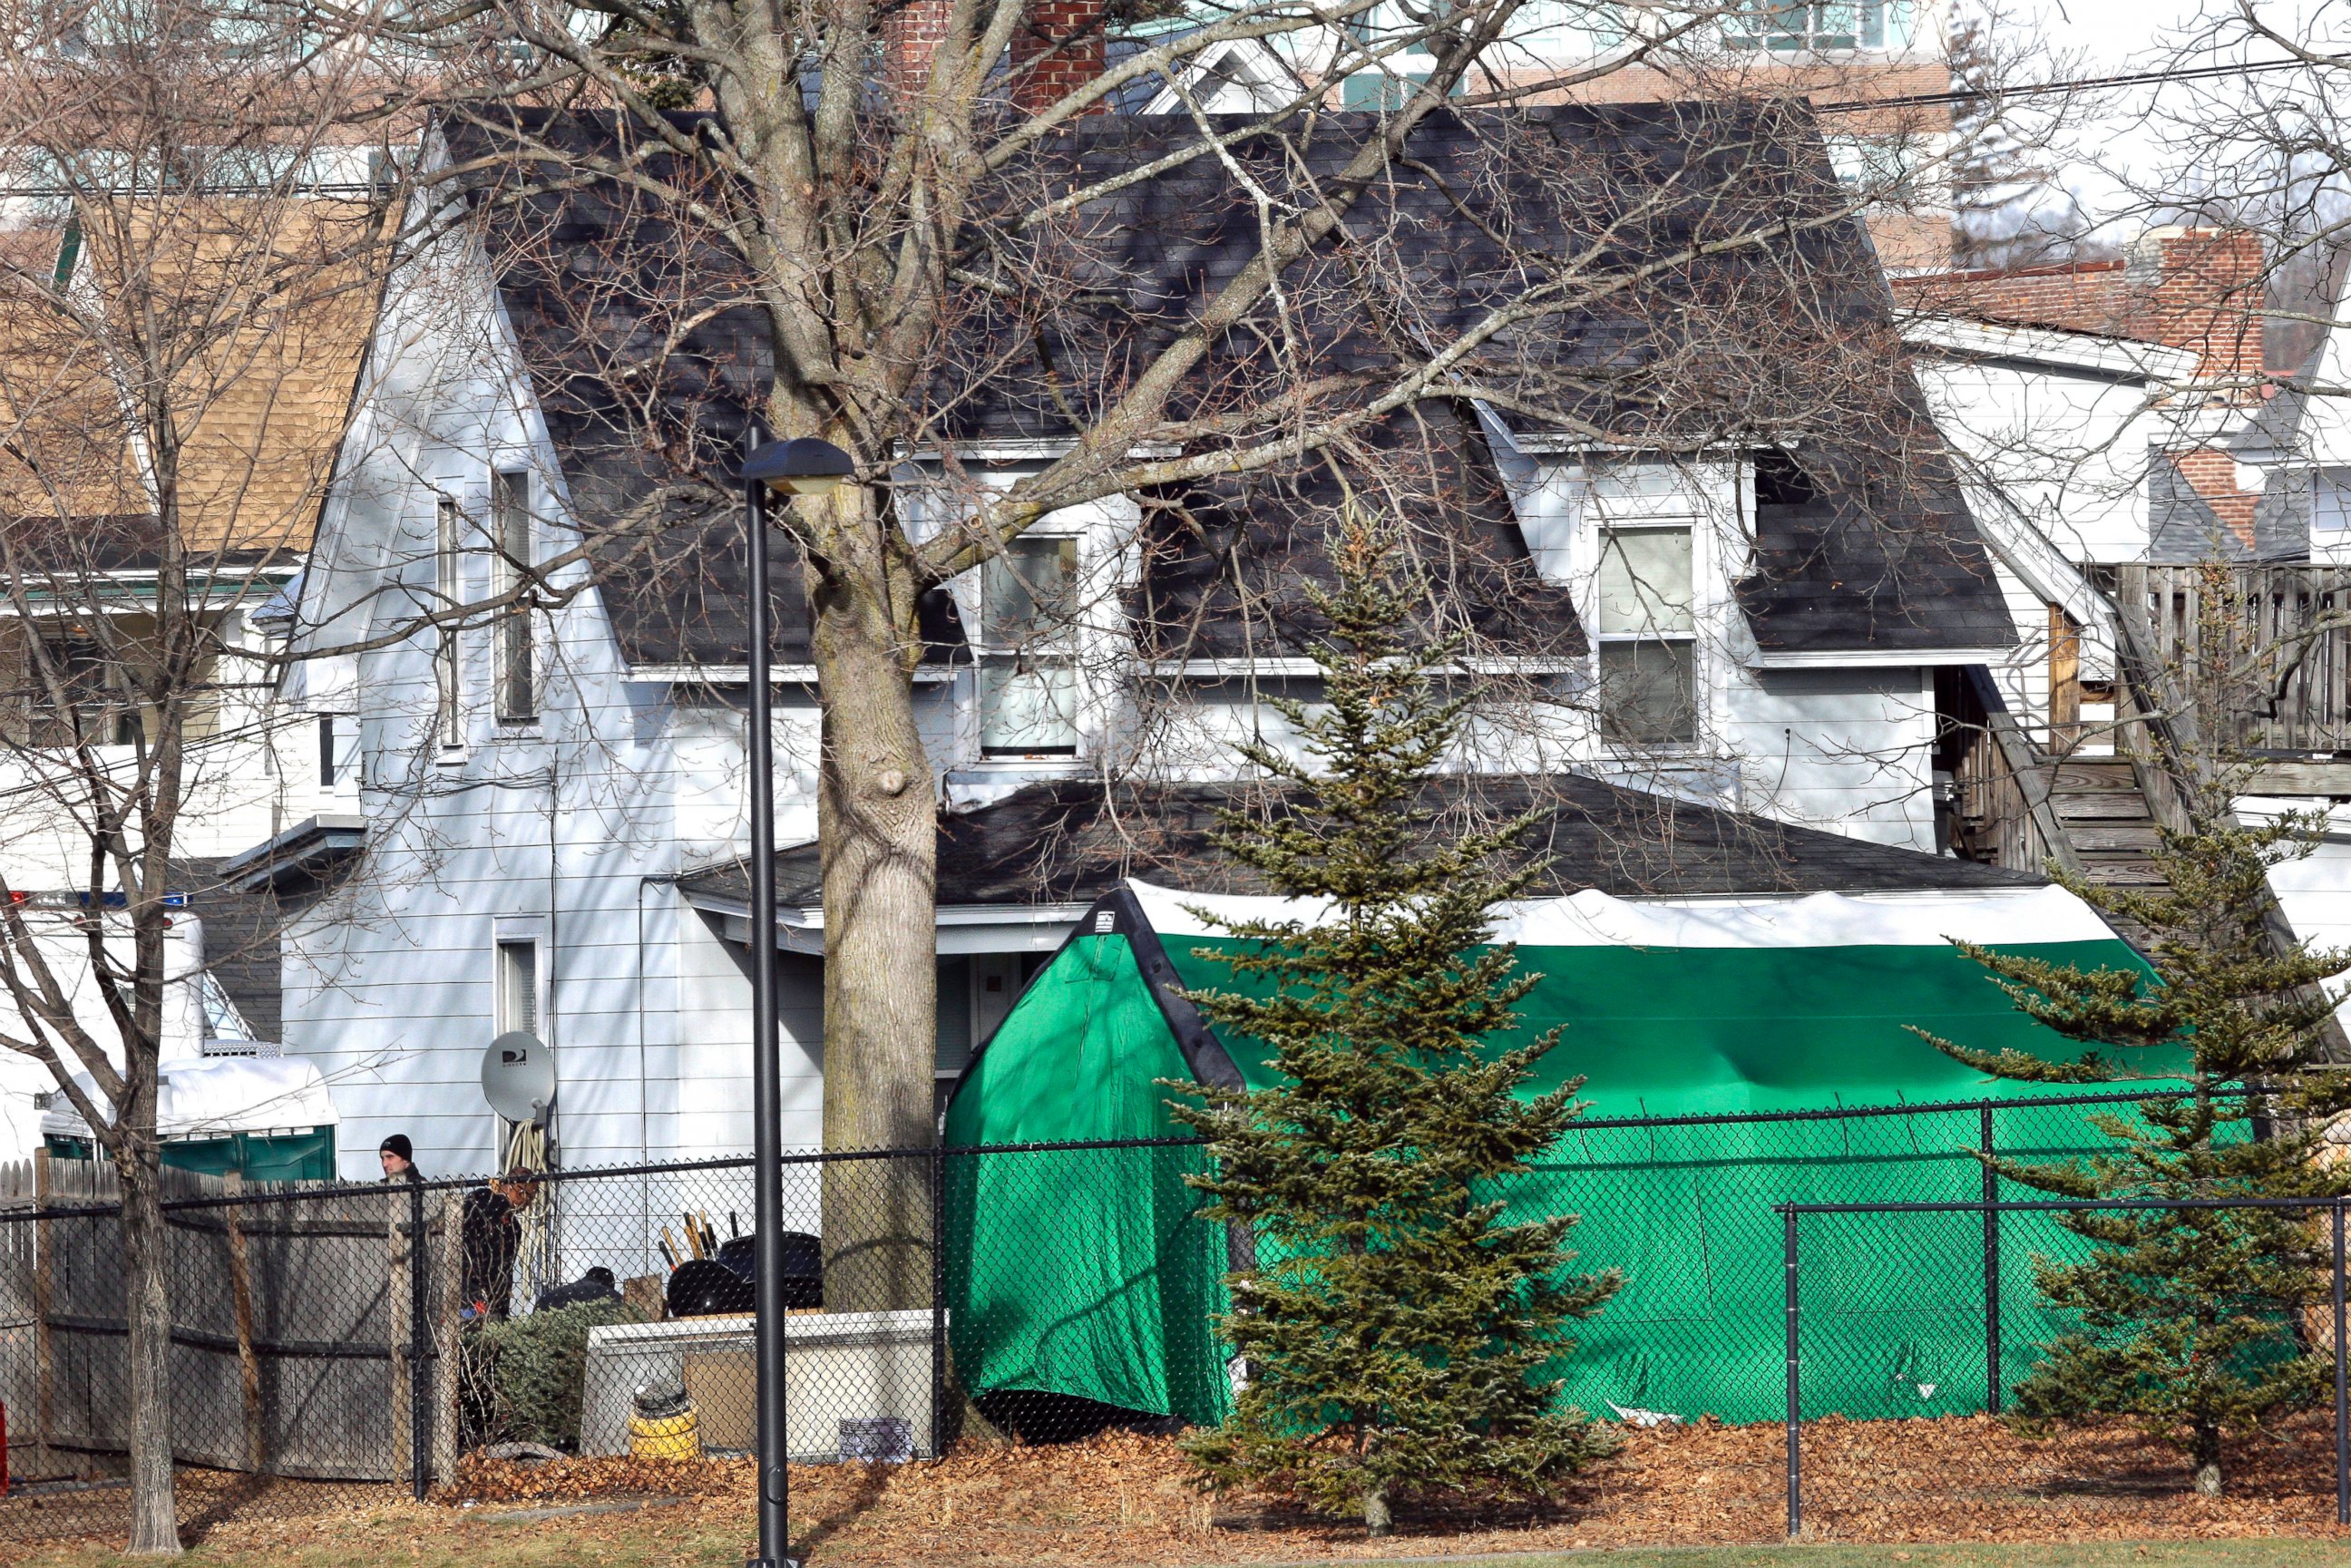 PHOTO: In this Jan. 17, 2017, file photo, a large green tent is seen in the back of a house on Hayward Street in Manchester, New Hampshire, where authorities searched for clues in the missing person's case of Denise Beaudin. 